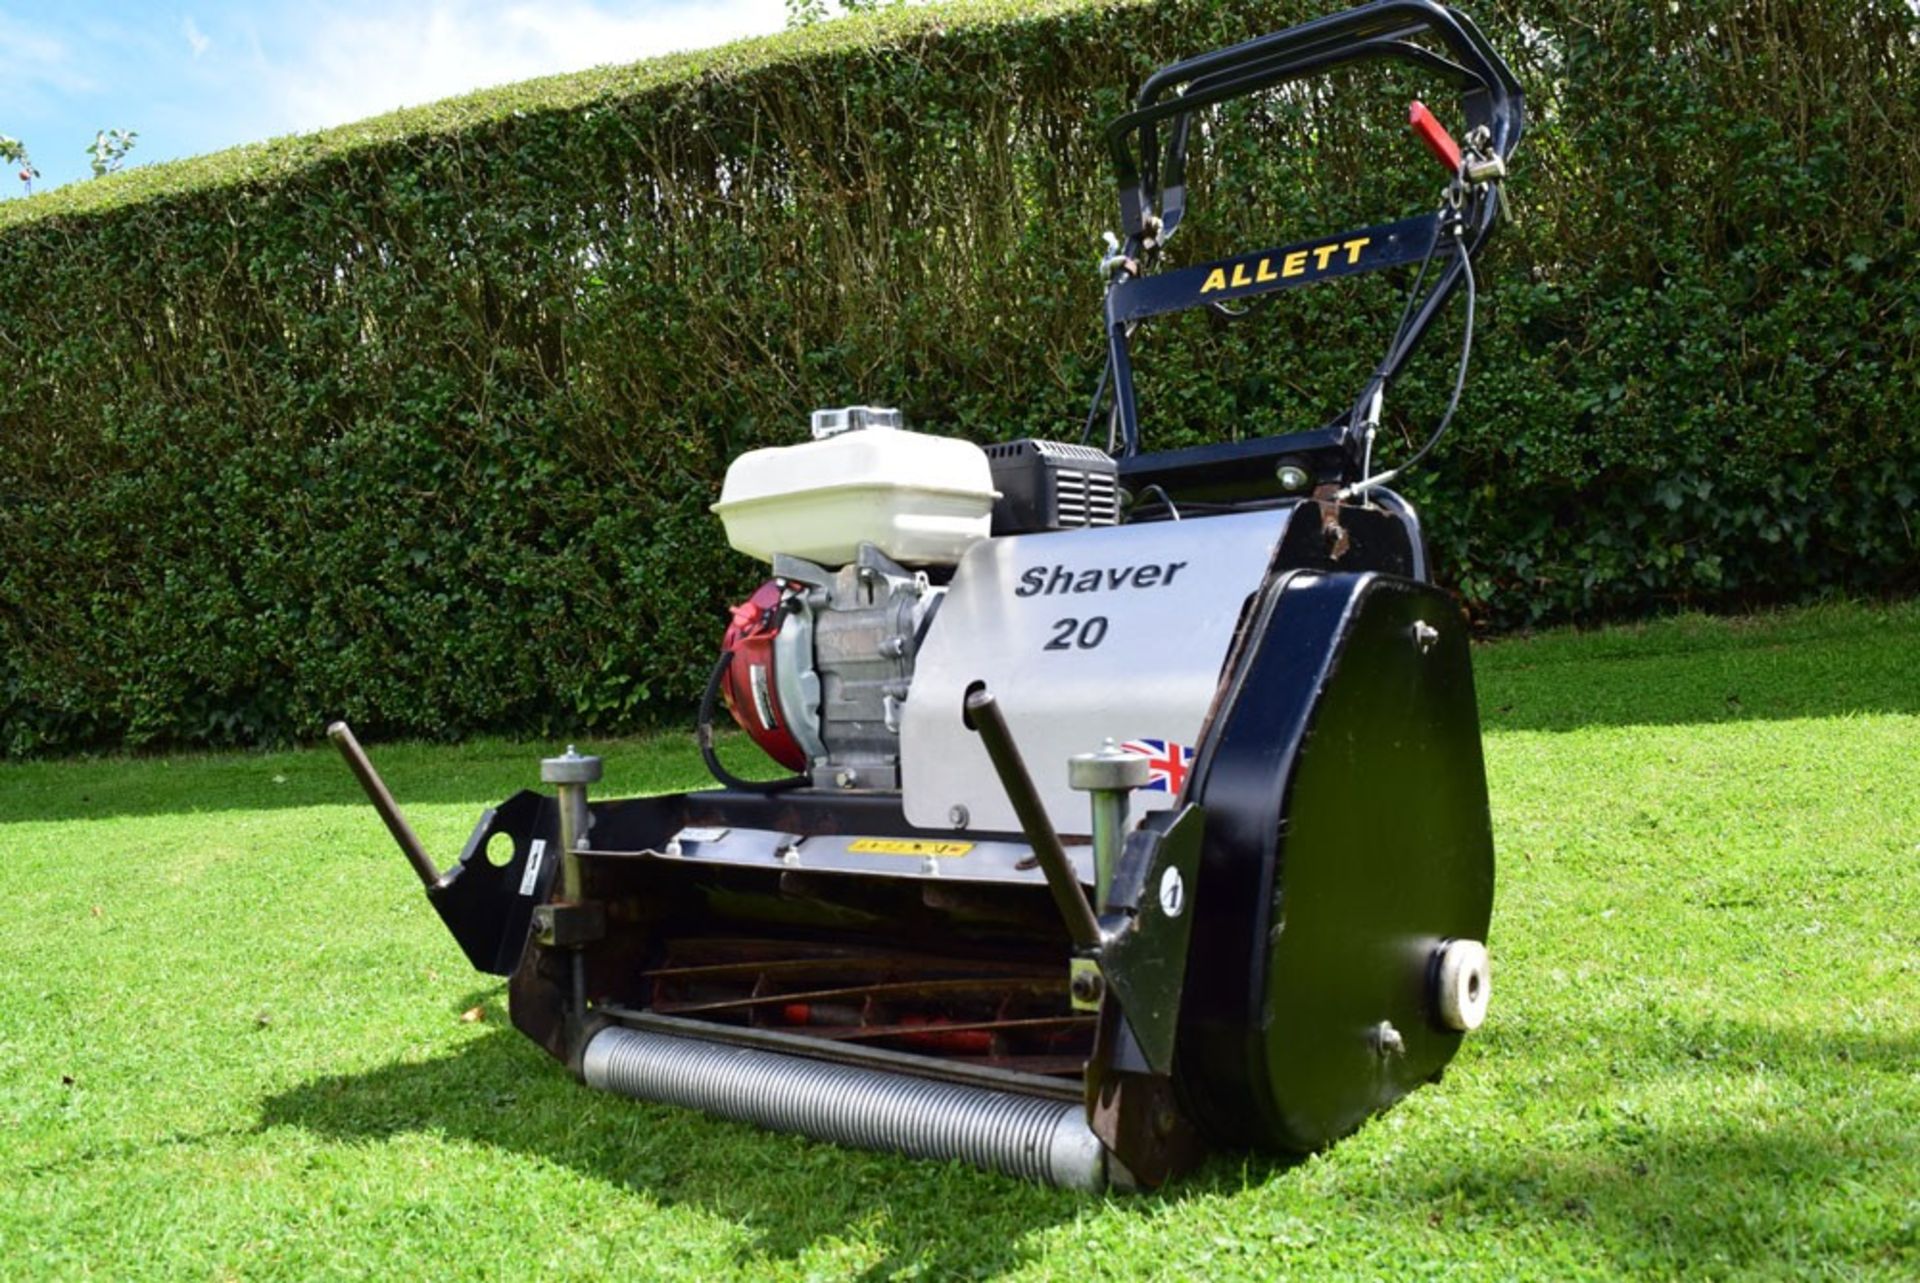 2012 Allett Shaver 20, 10 Blade Cylinder Mower With Grass Box - Image 3 of 8